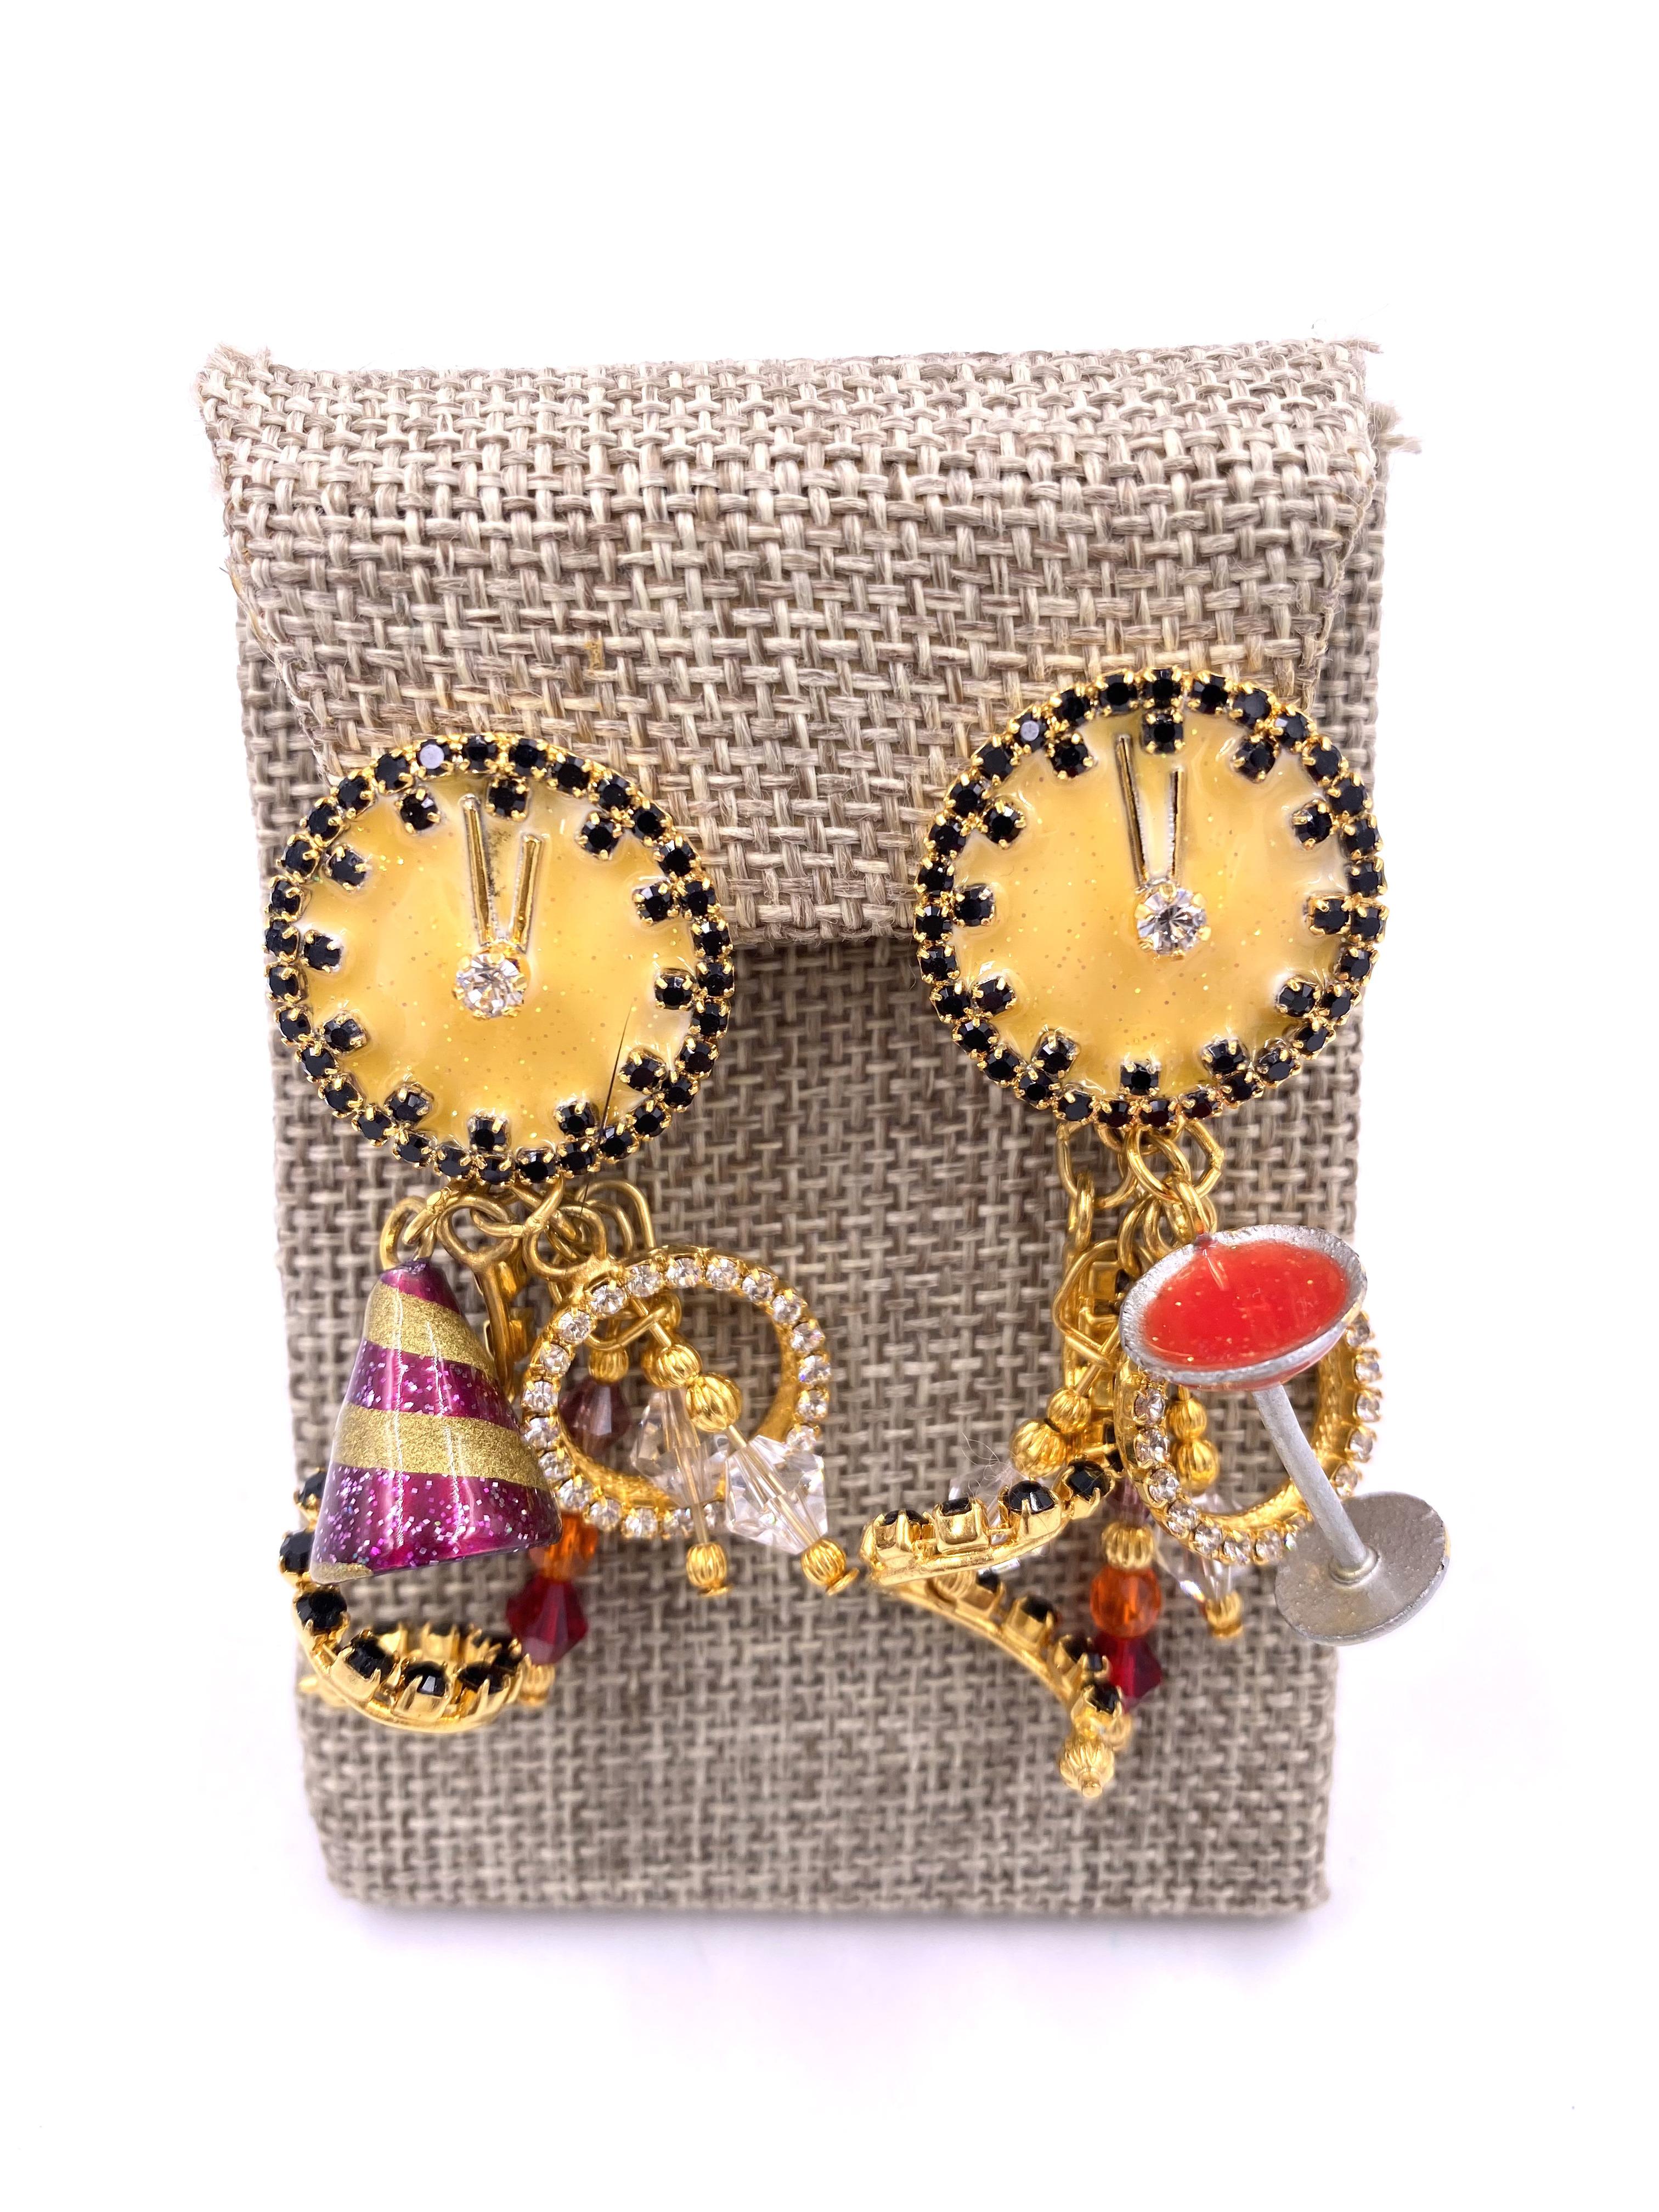 Indulge in luxury with Lunch at the Ritz Earrings - Party Time. These dangle earrings feature whimsical party hat, clock, and martini glass charms for a playful touch. Perfect for adding a touch of glamour and sophistication to any outfit.

Length: